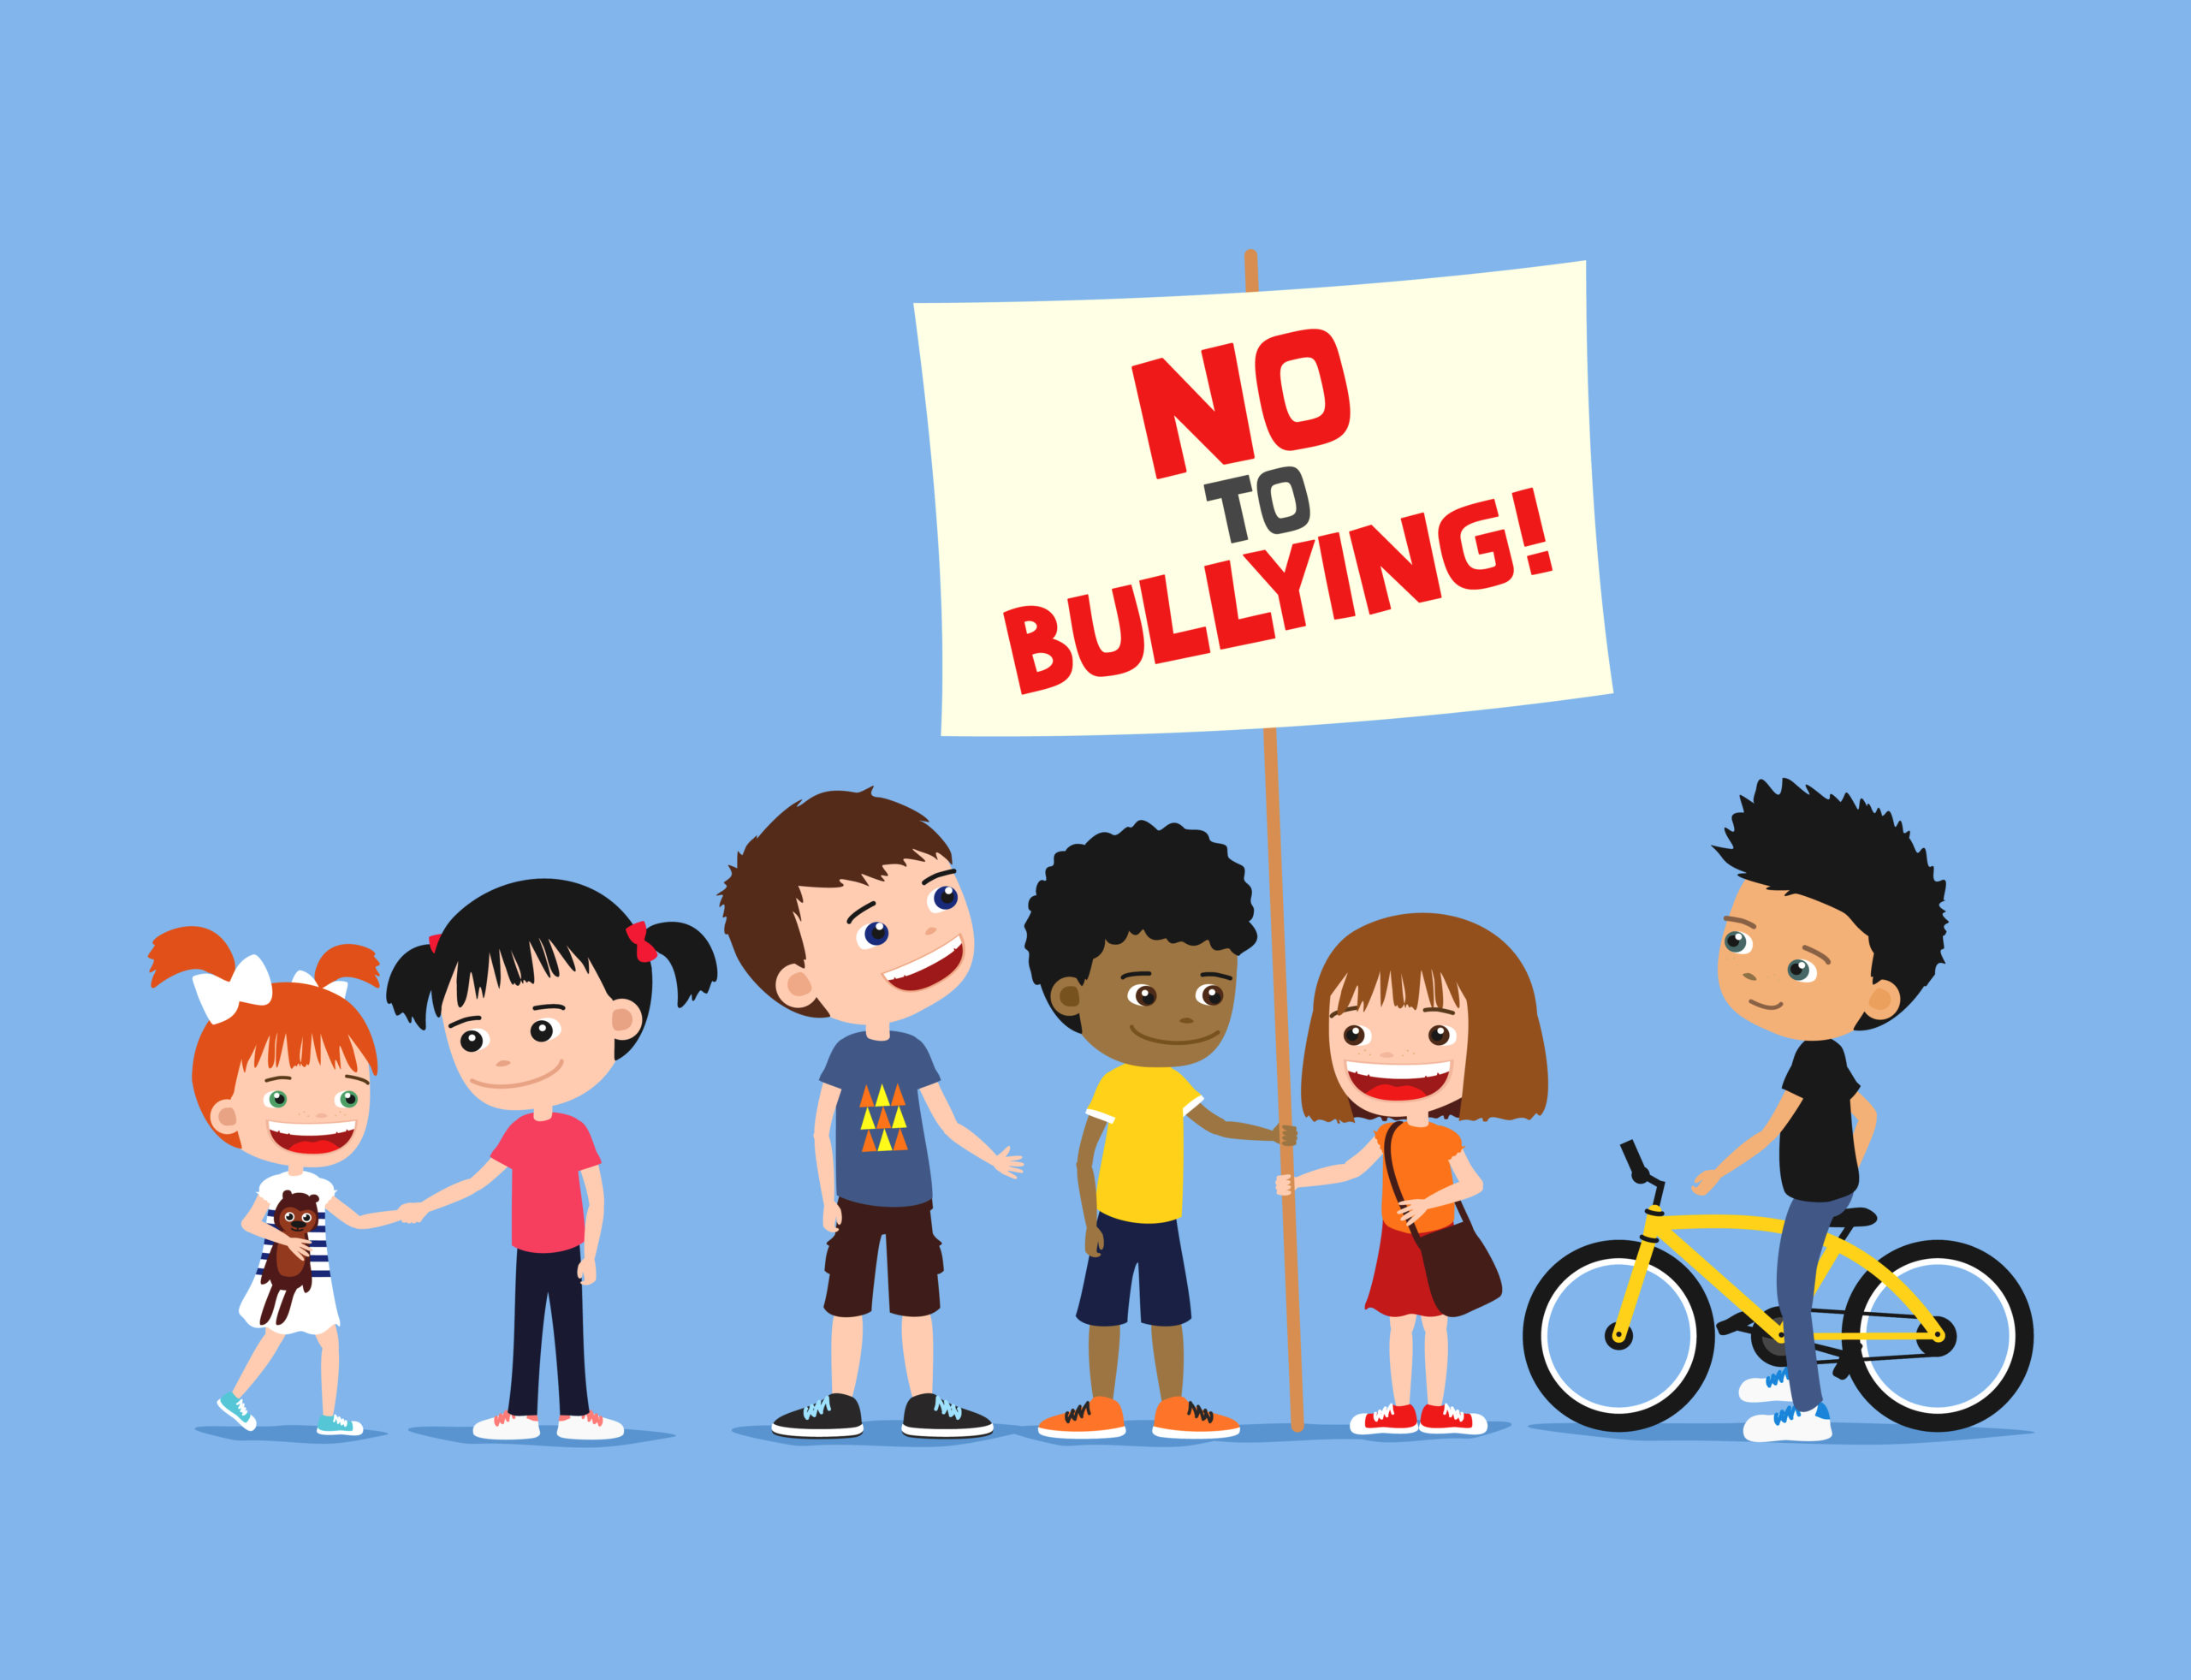 let-s-stand-united-against-bullying-plmr